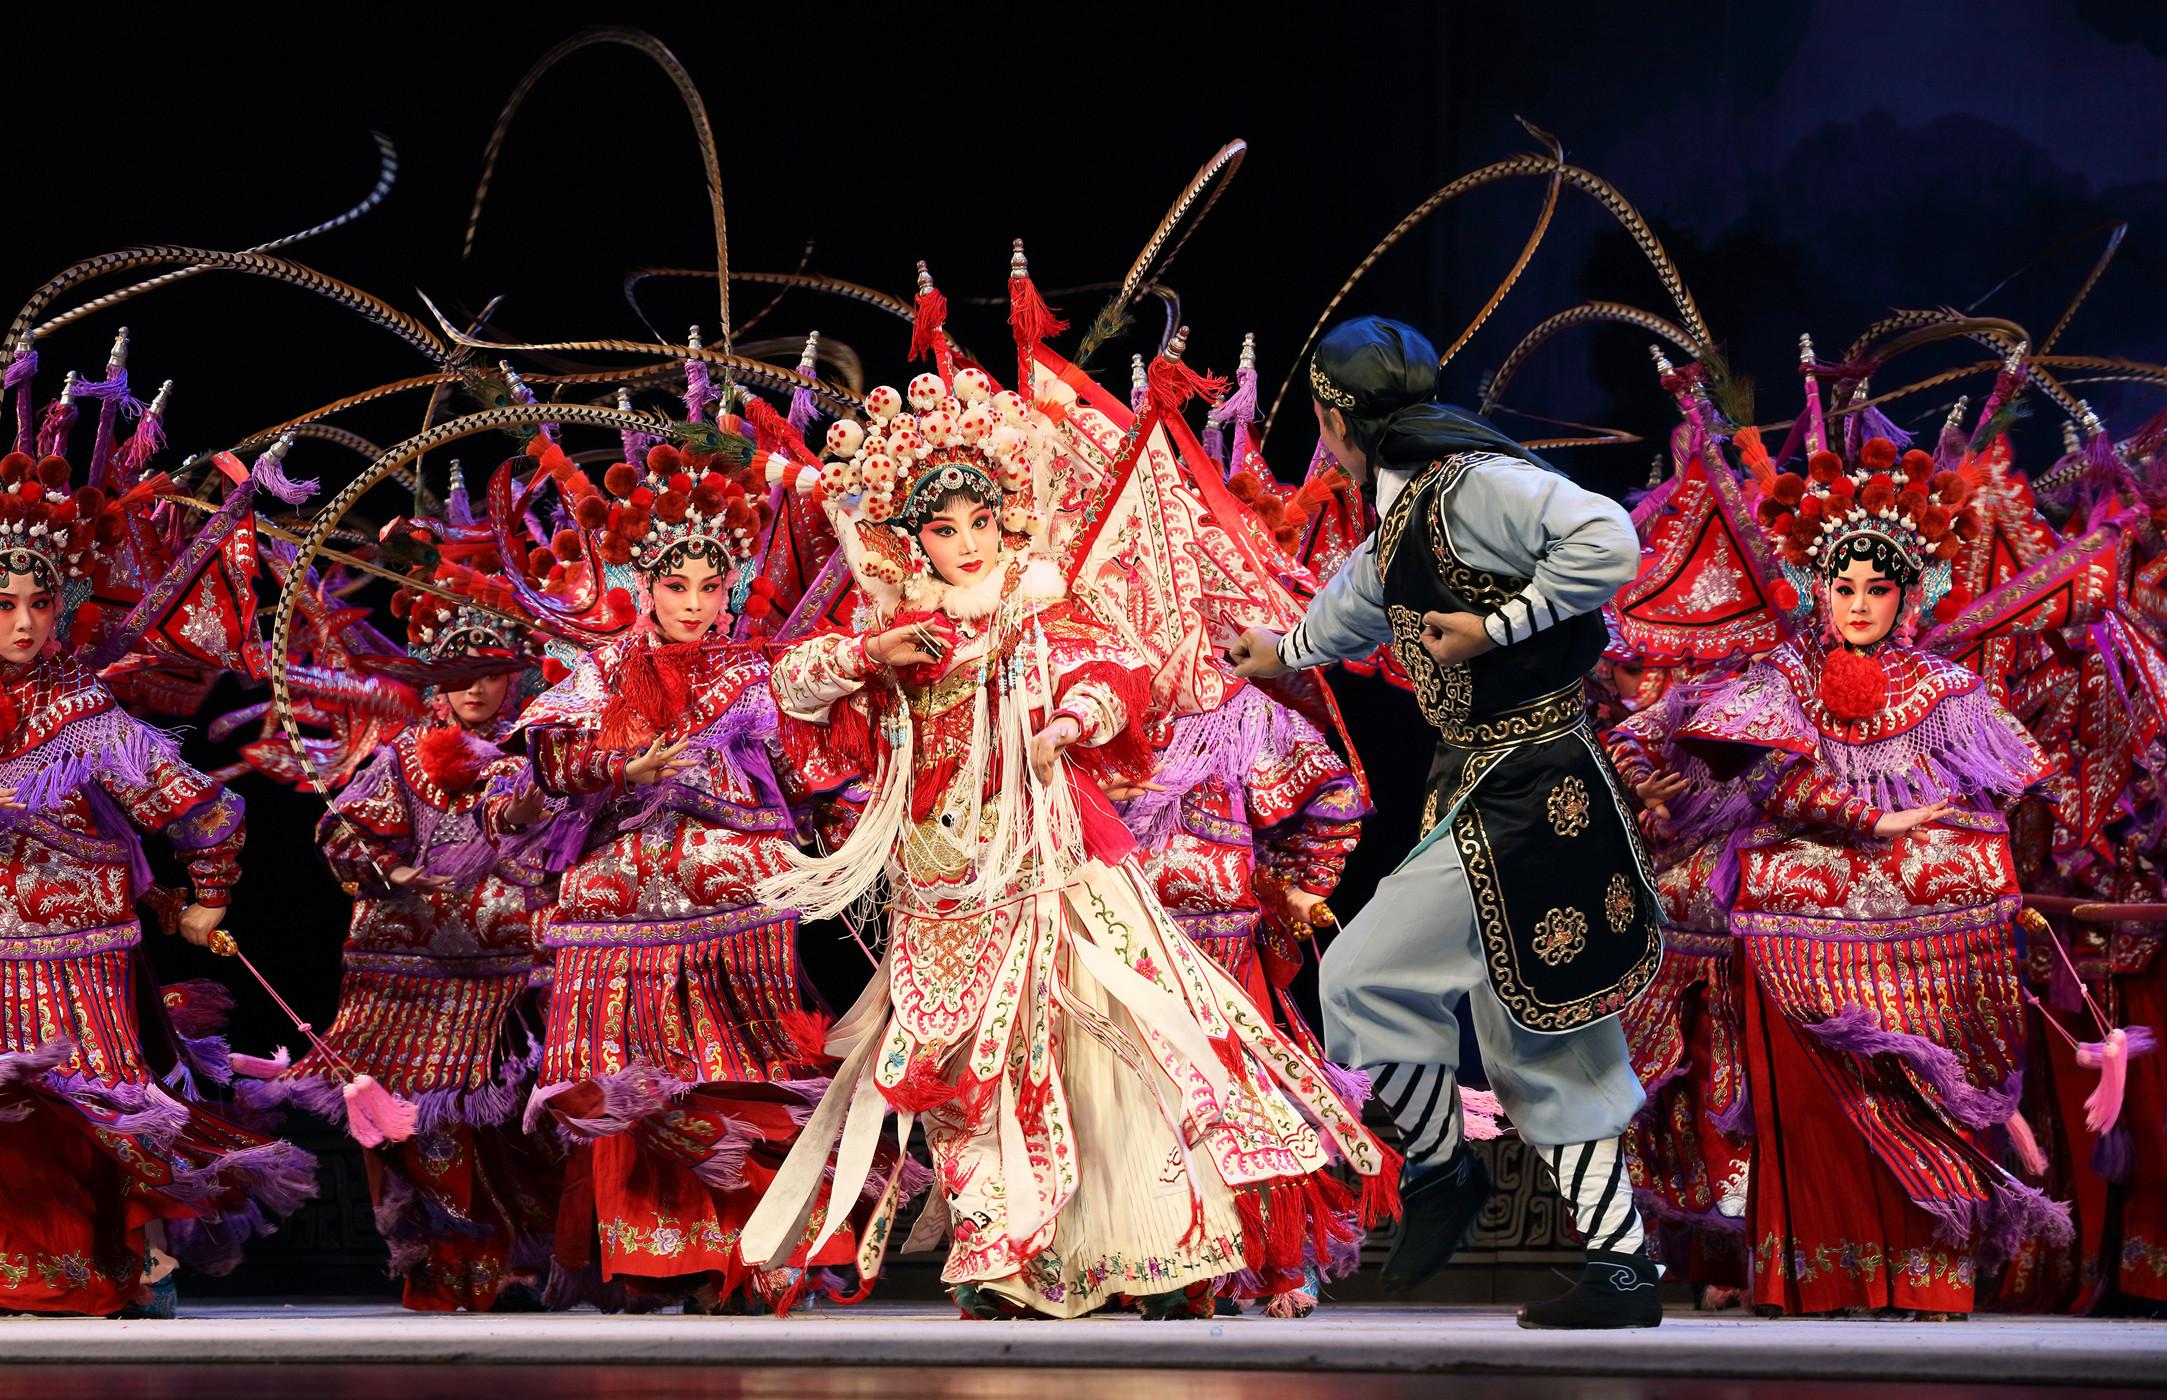 The Leisure and Cultural Services Department has invited the Zhejiang Wu Opera Research Centre to return to Hong Kong for three stunning performances in late July at this year's Chinese Opera Festival. Photo shows a scene from Excerpt "Mu Guiying Breaking Through the Army Formation in Front of the Palace".